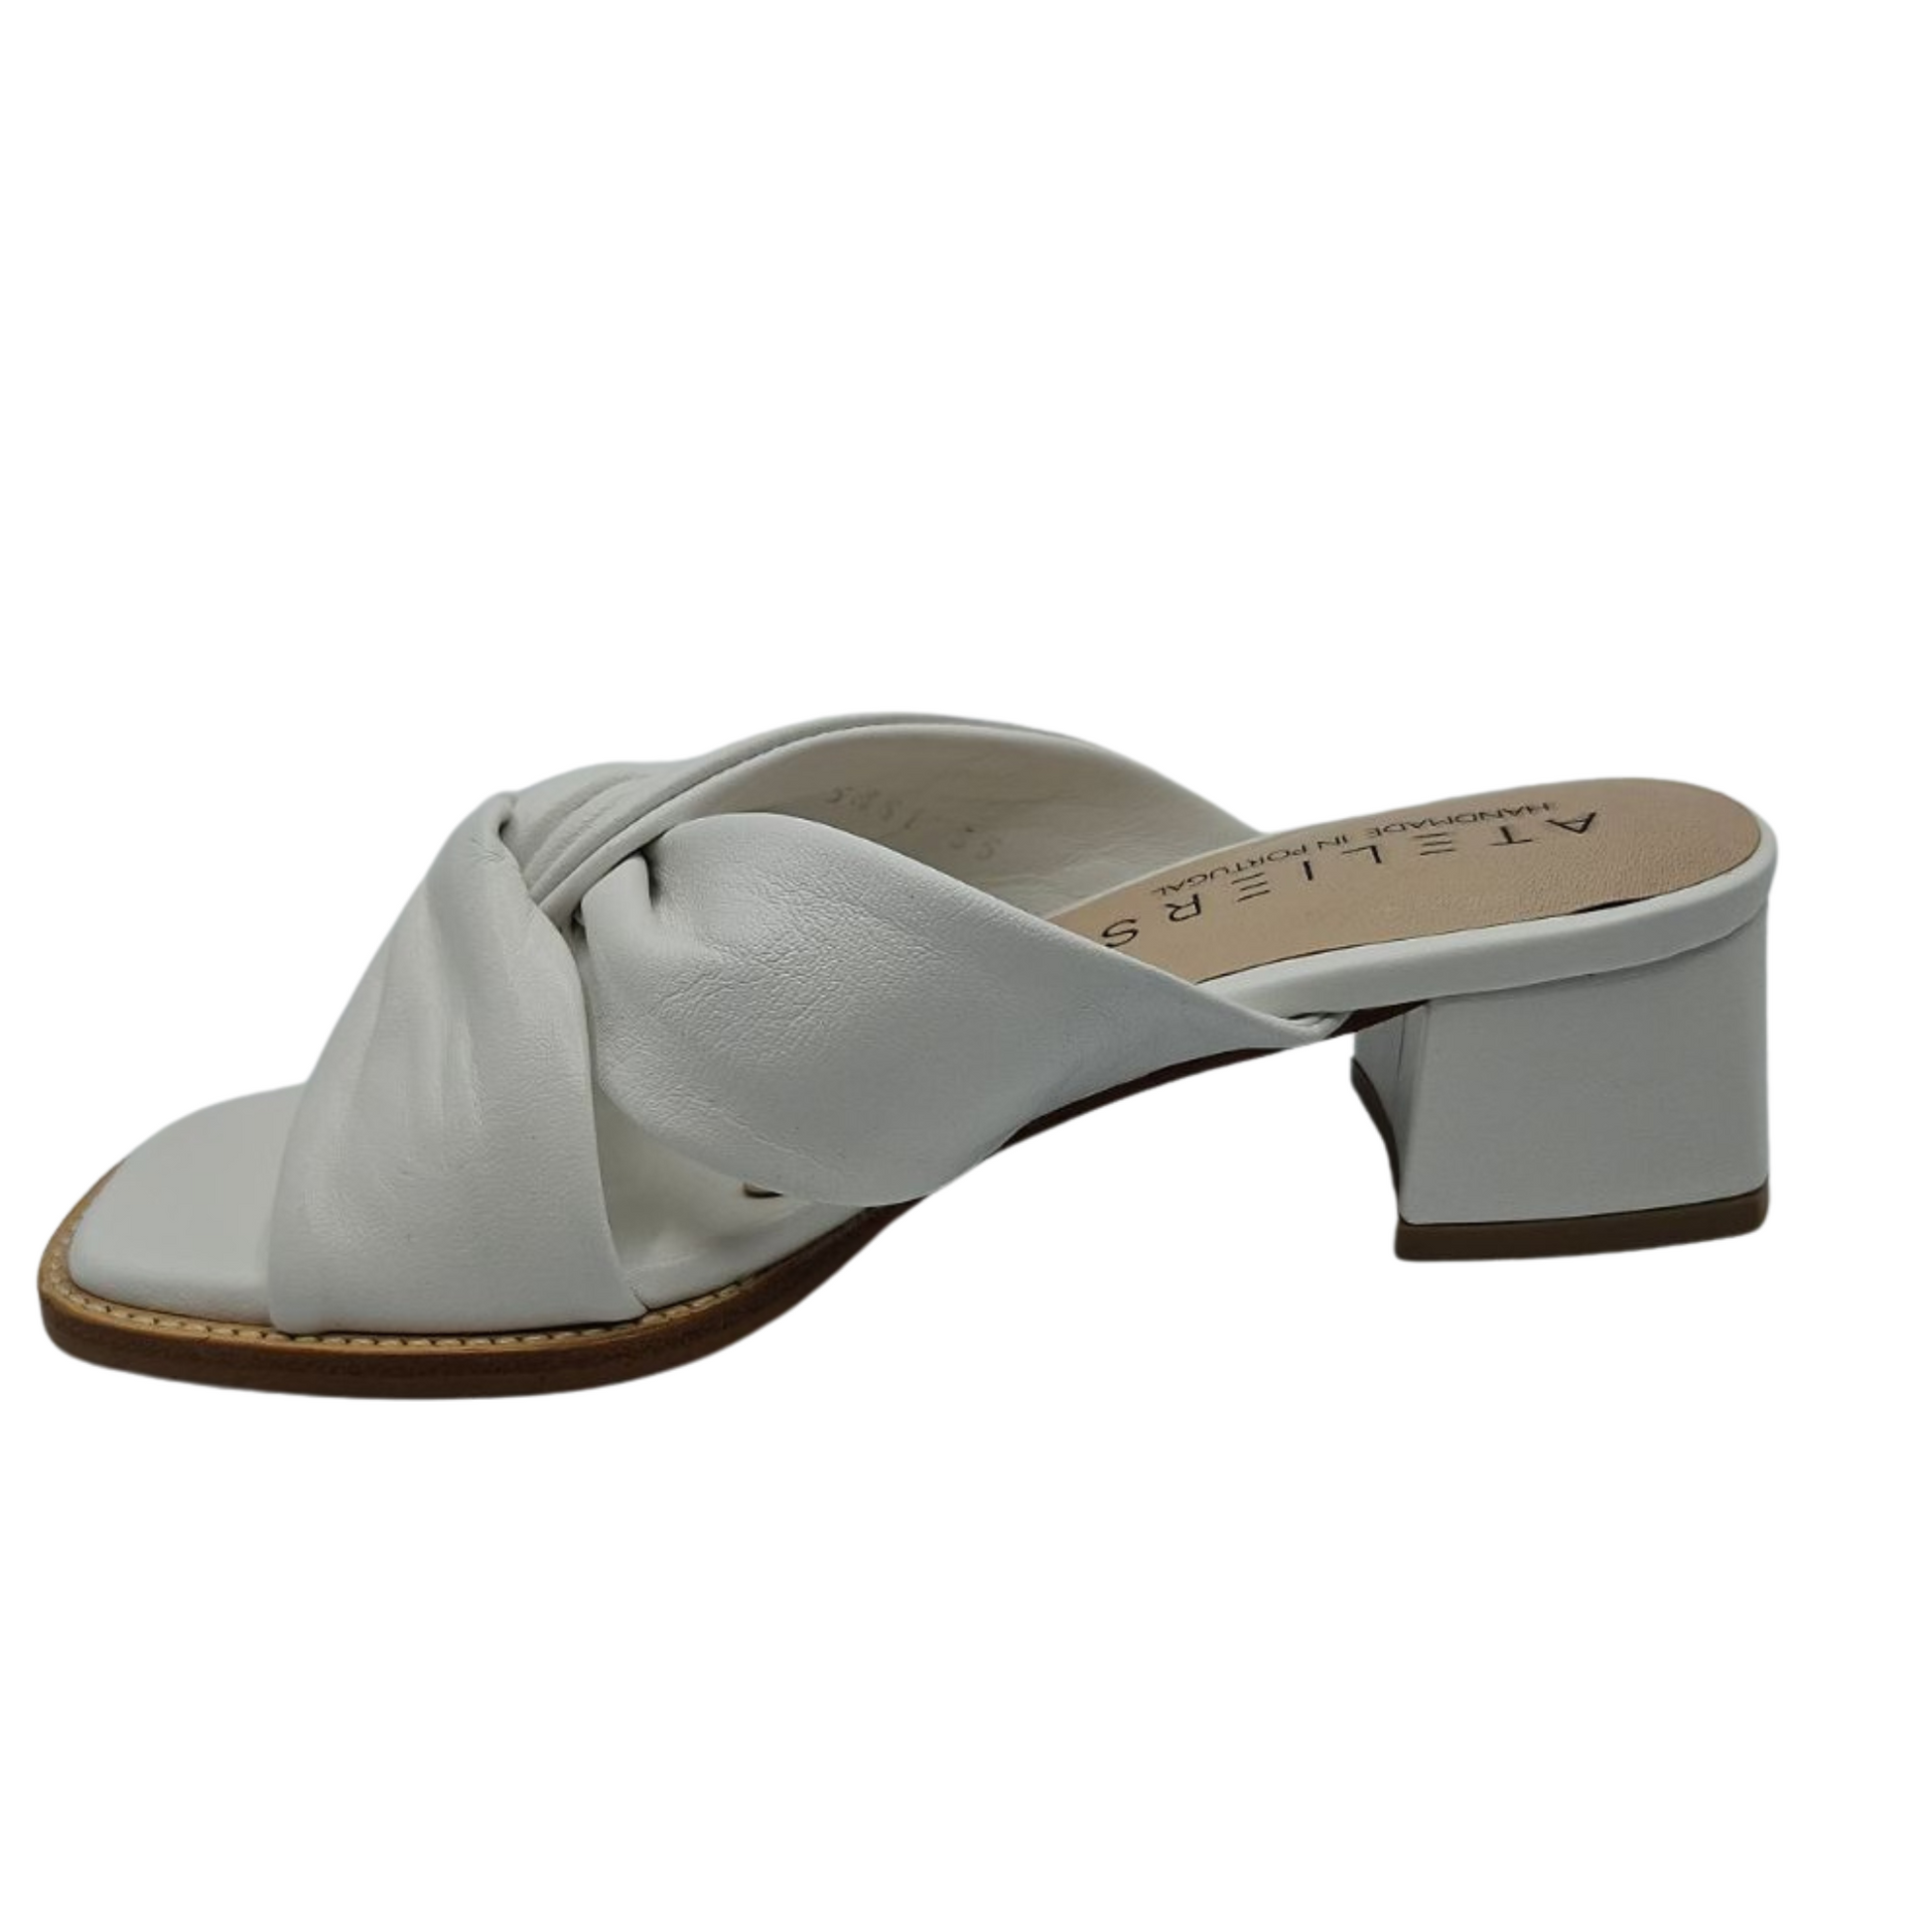 Left facing view of white leather sandals with a soft square toe. These heels have a leather lining and leather wrapped block heel. Knotted straps on upper